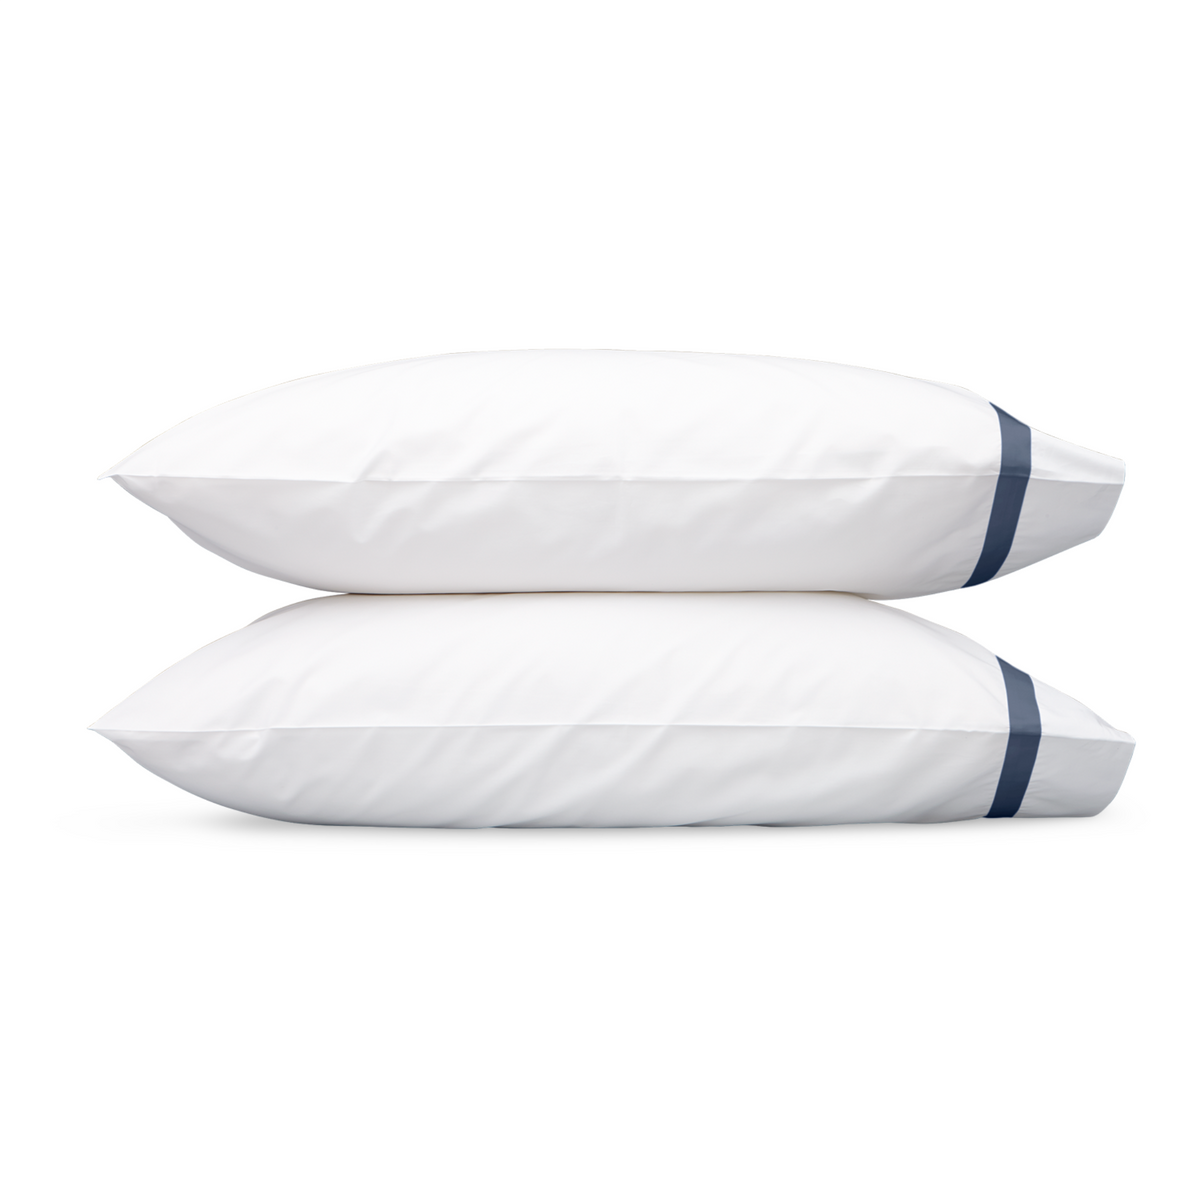 A Pair of Matouk Lowell Bedding Pillowcases in Steel Blue Color